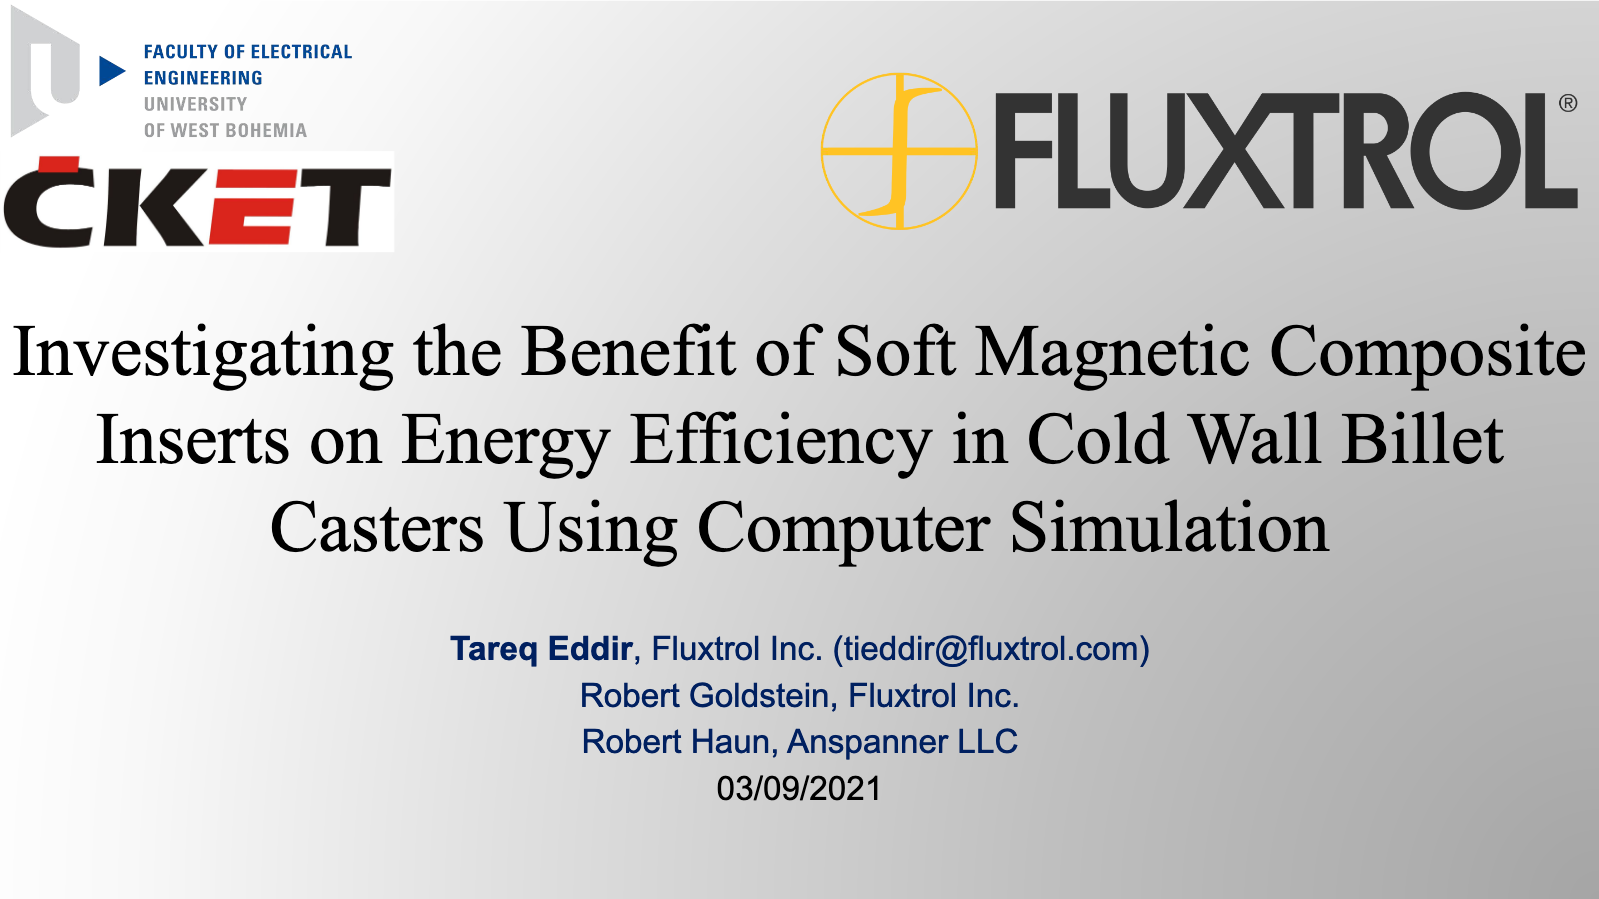 Fluxtrol  UIE 2021 Investigating the Benefit of Soft Magnetic Composite Inserts on Energy Efficiency in Cold Wall Billet Casters Using Computer Simulation Presentation